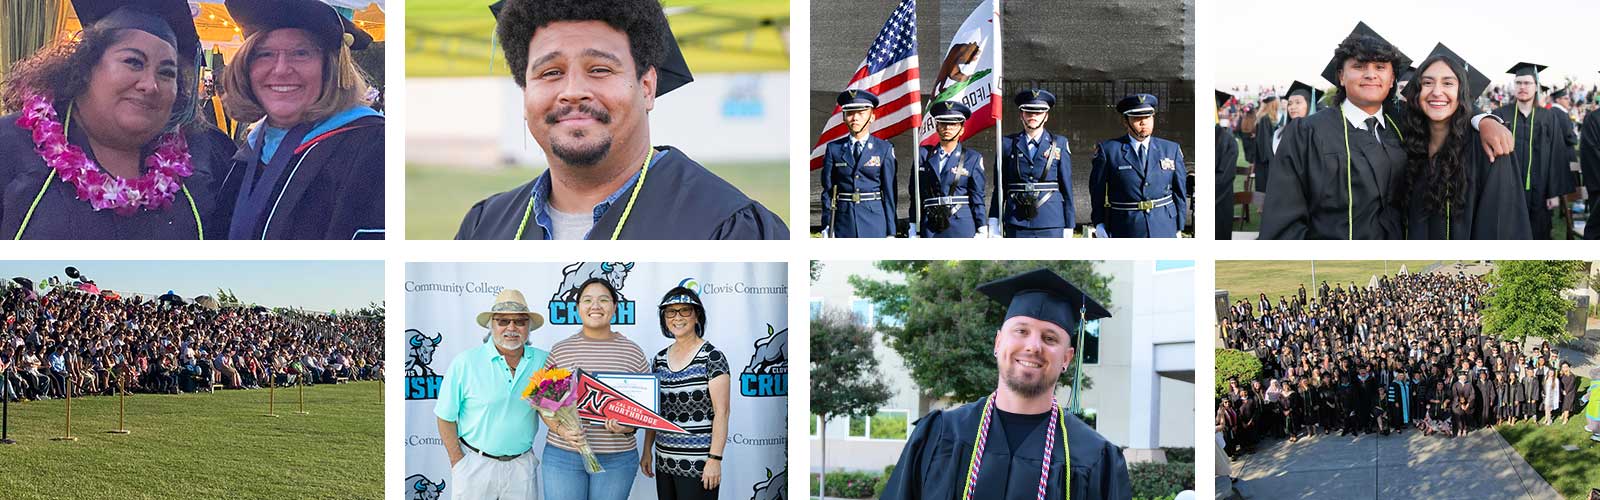 A selection of photos taken at the 2022 commencement celebration